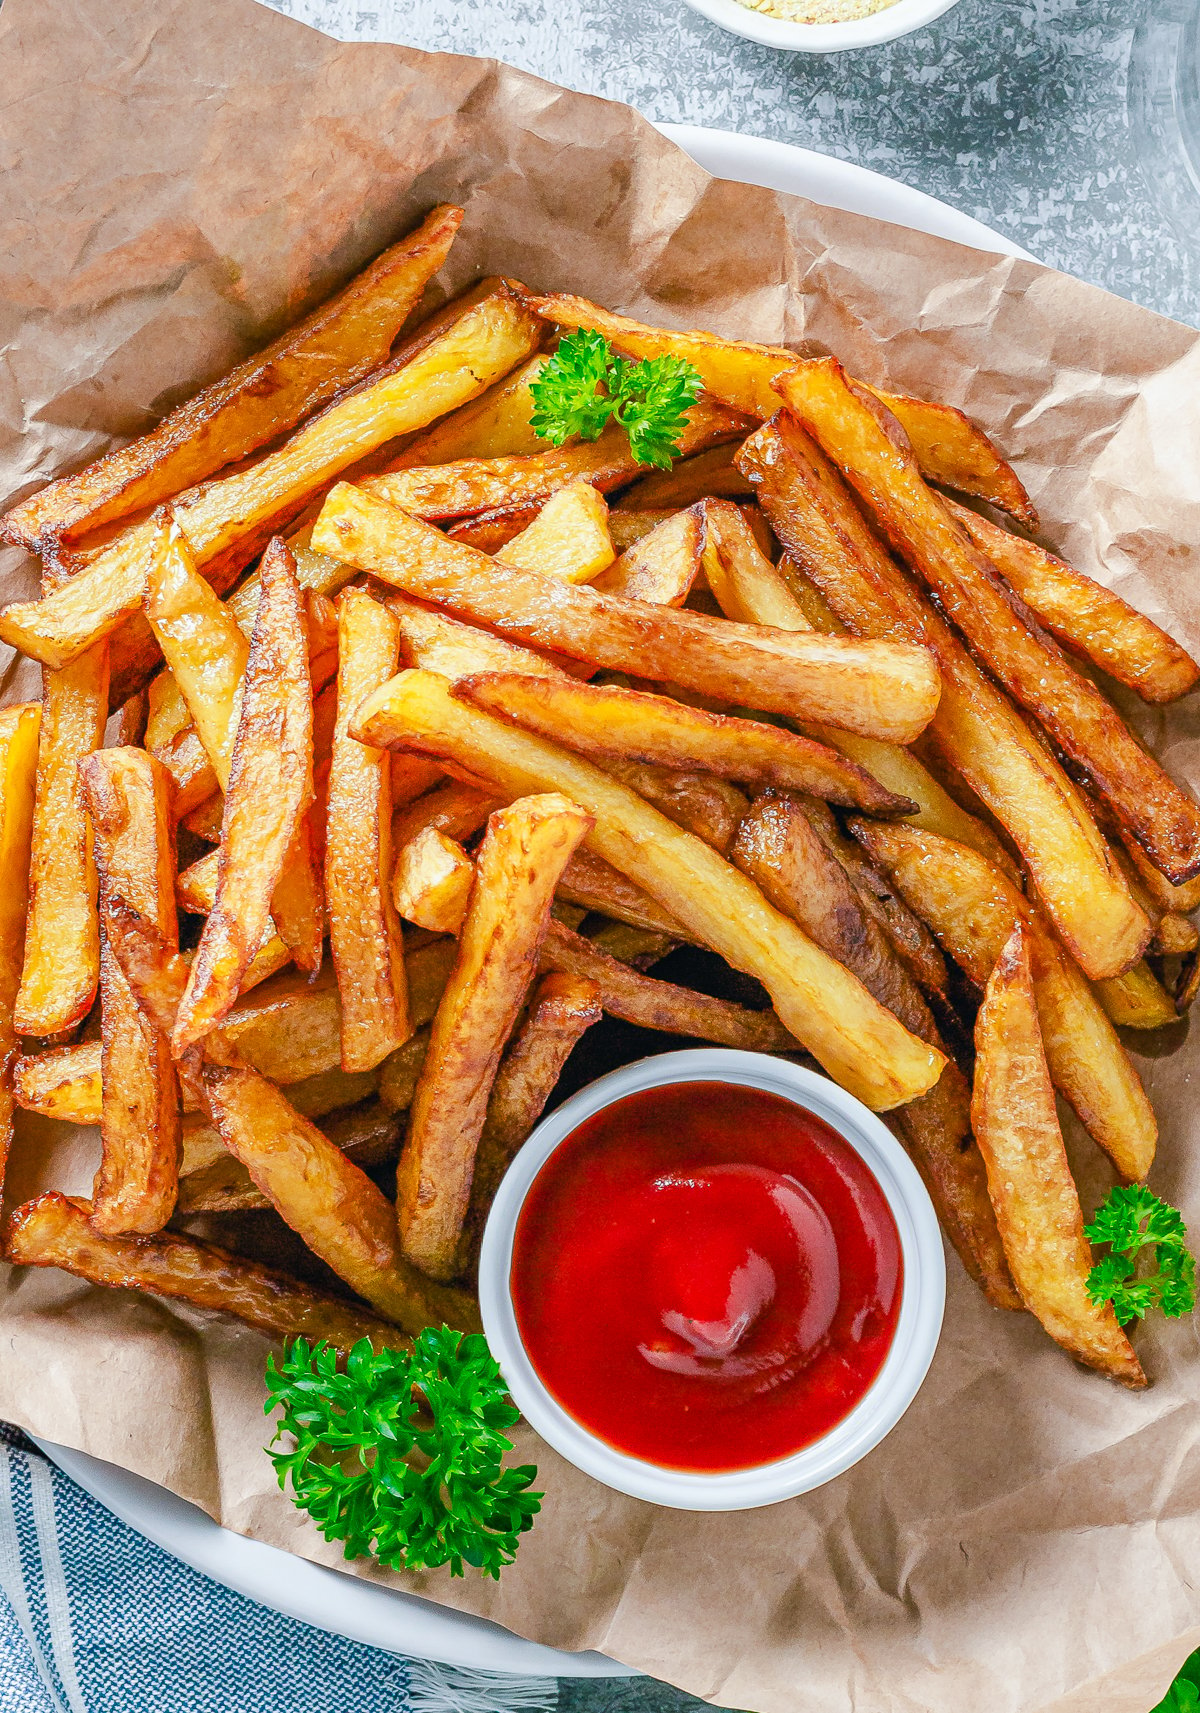 Overhead photo of French Fries on parchment paper with ketchup and parsley.